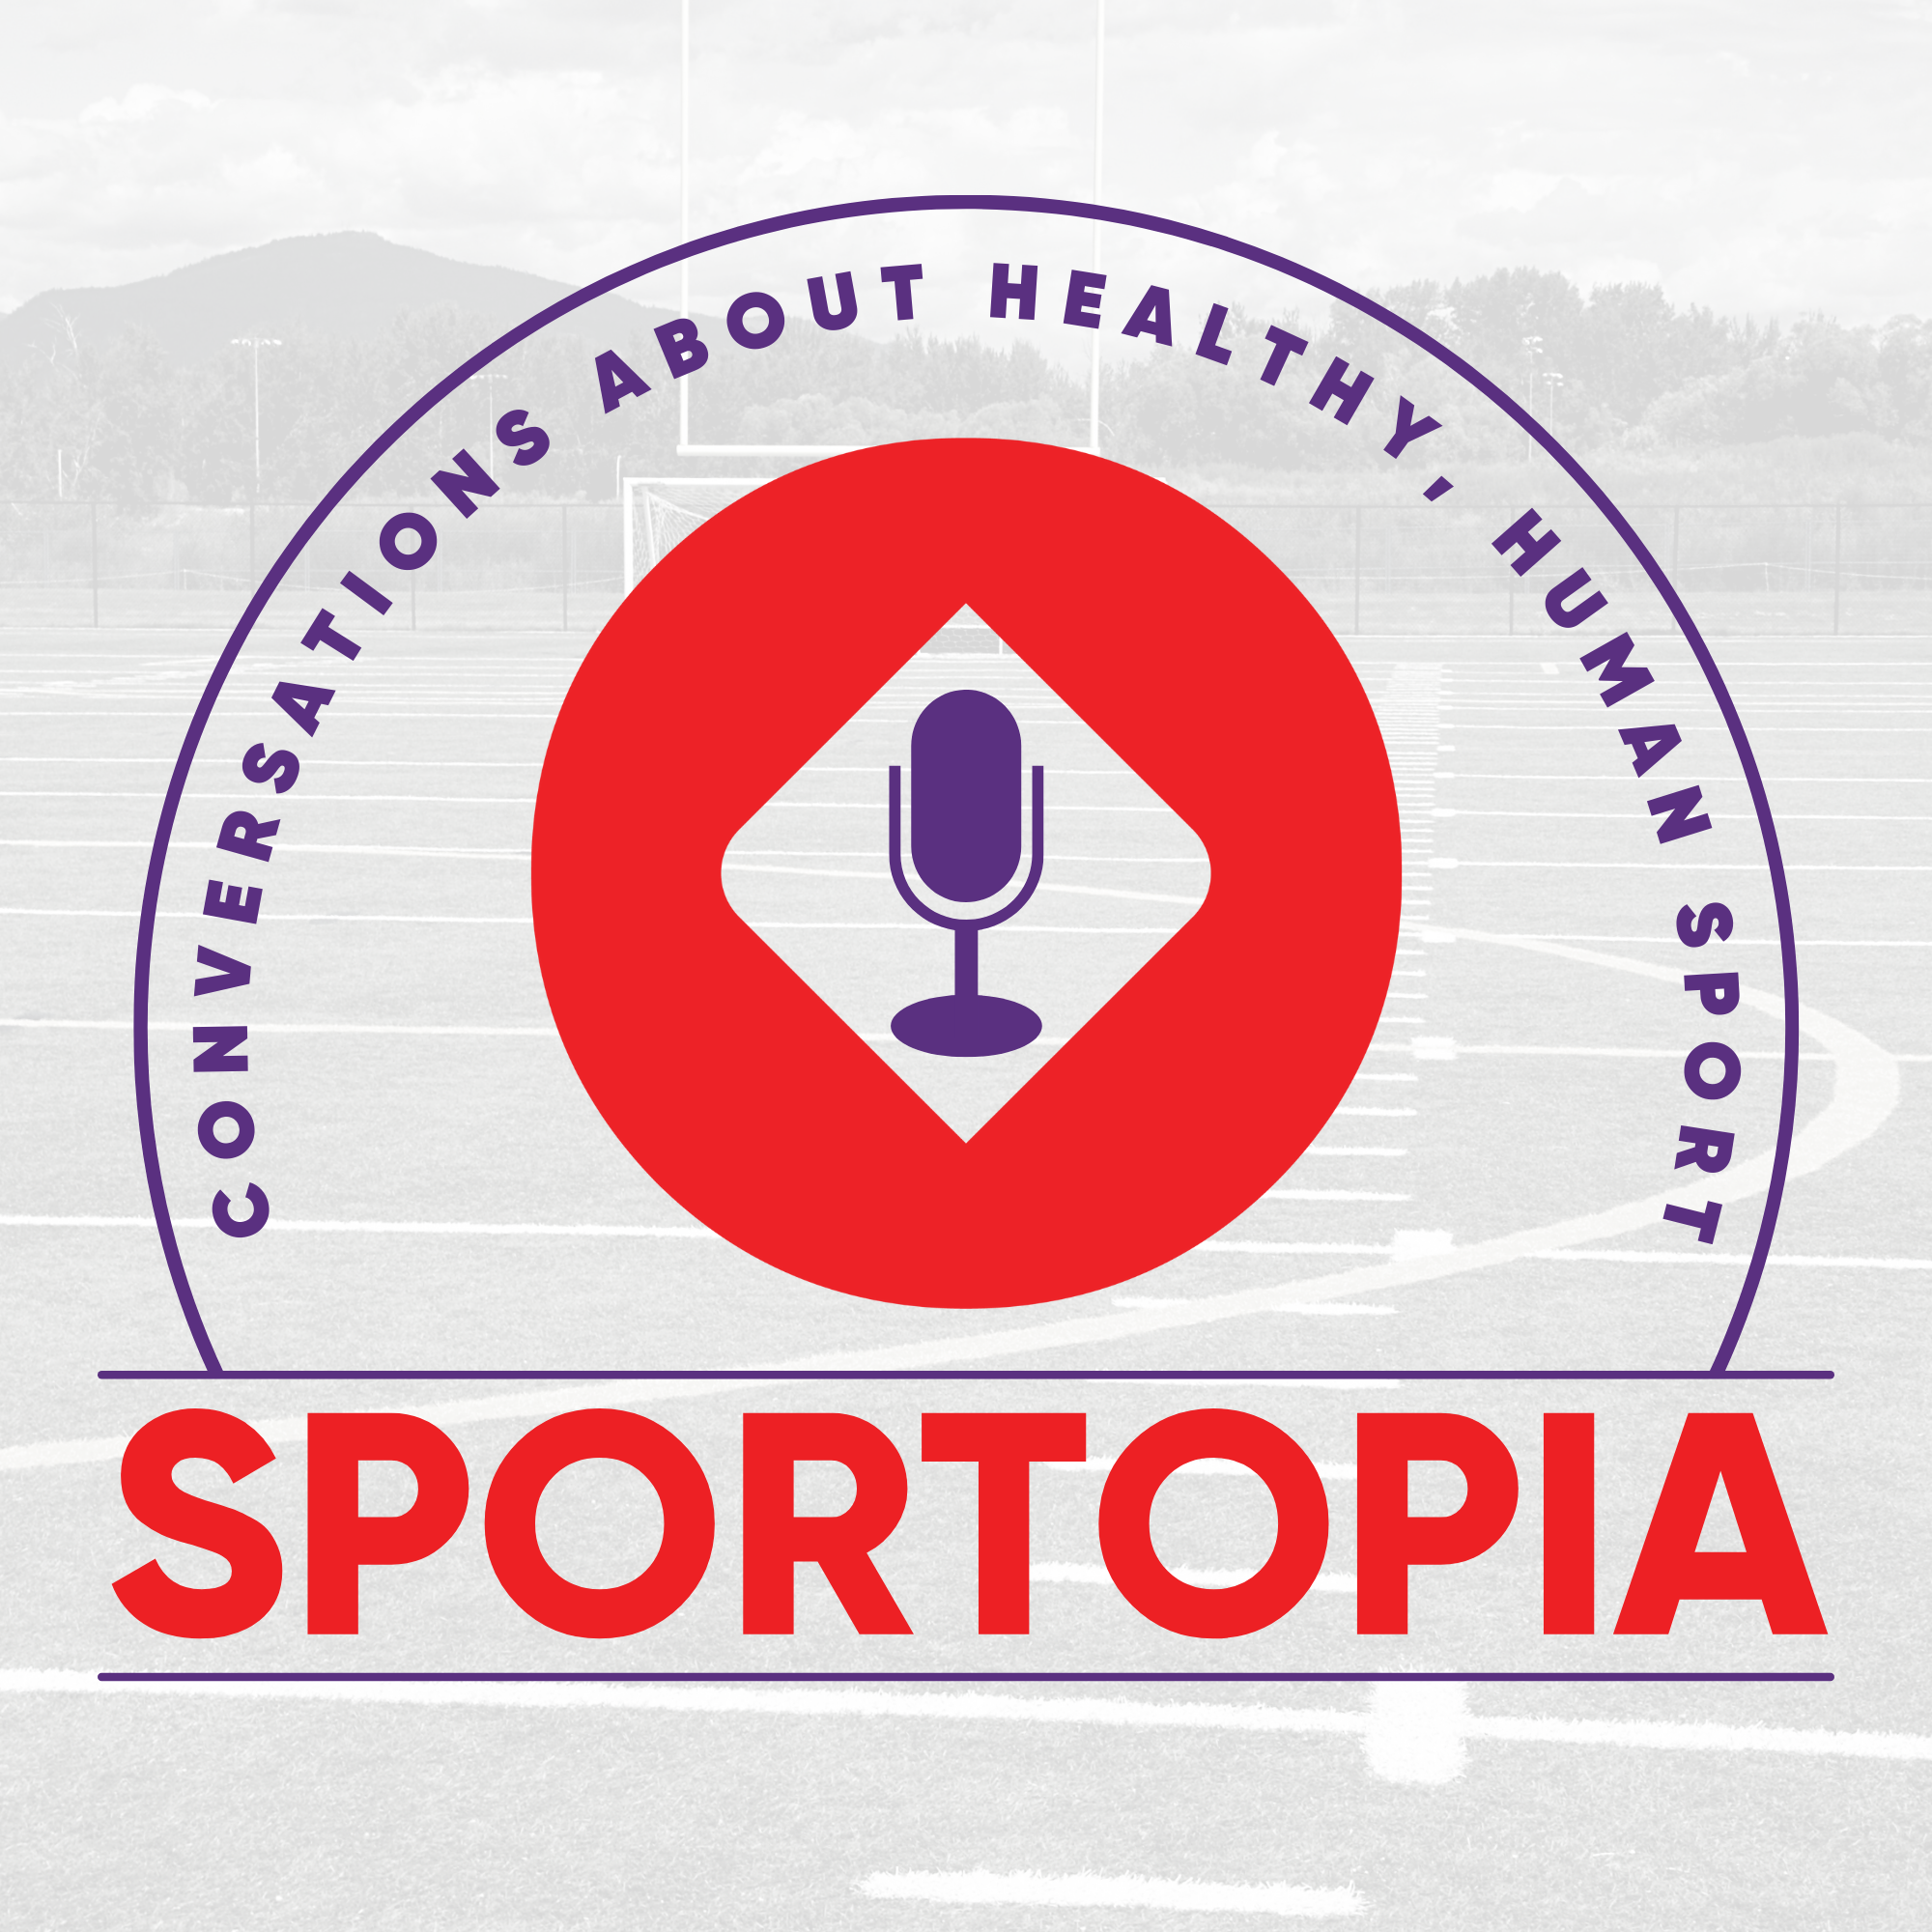 Episode 21 - Inviting parents into the sport experience